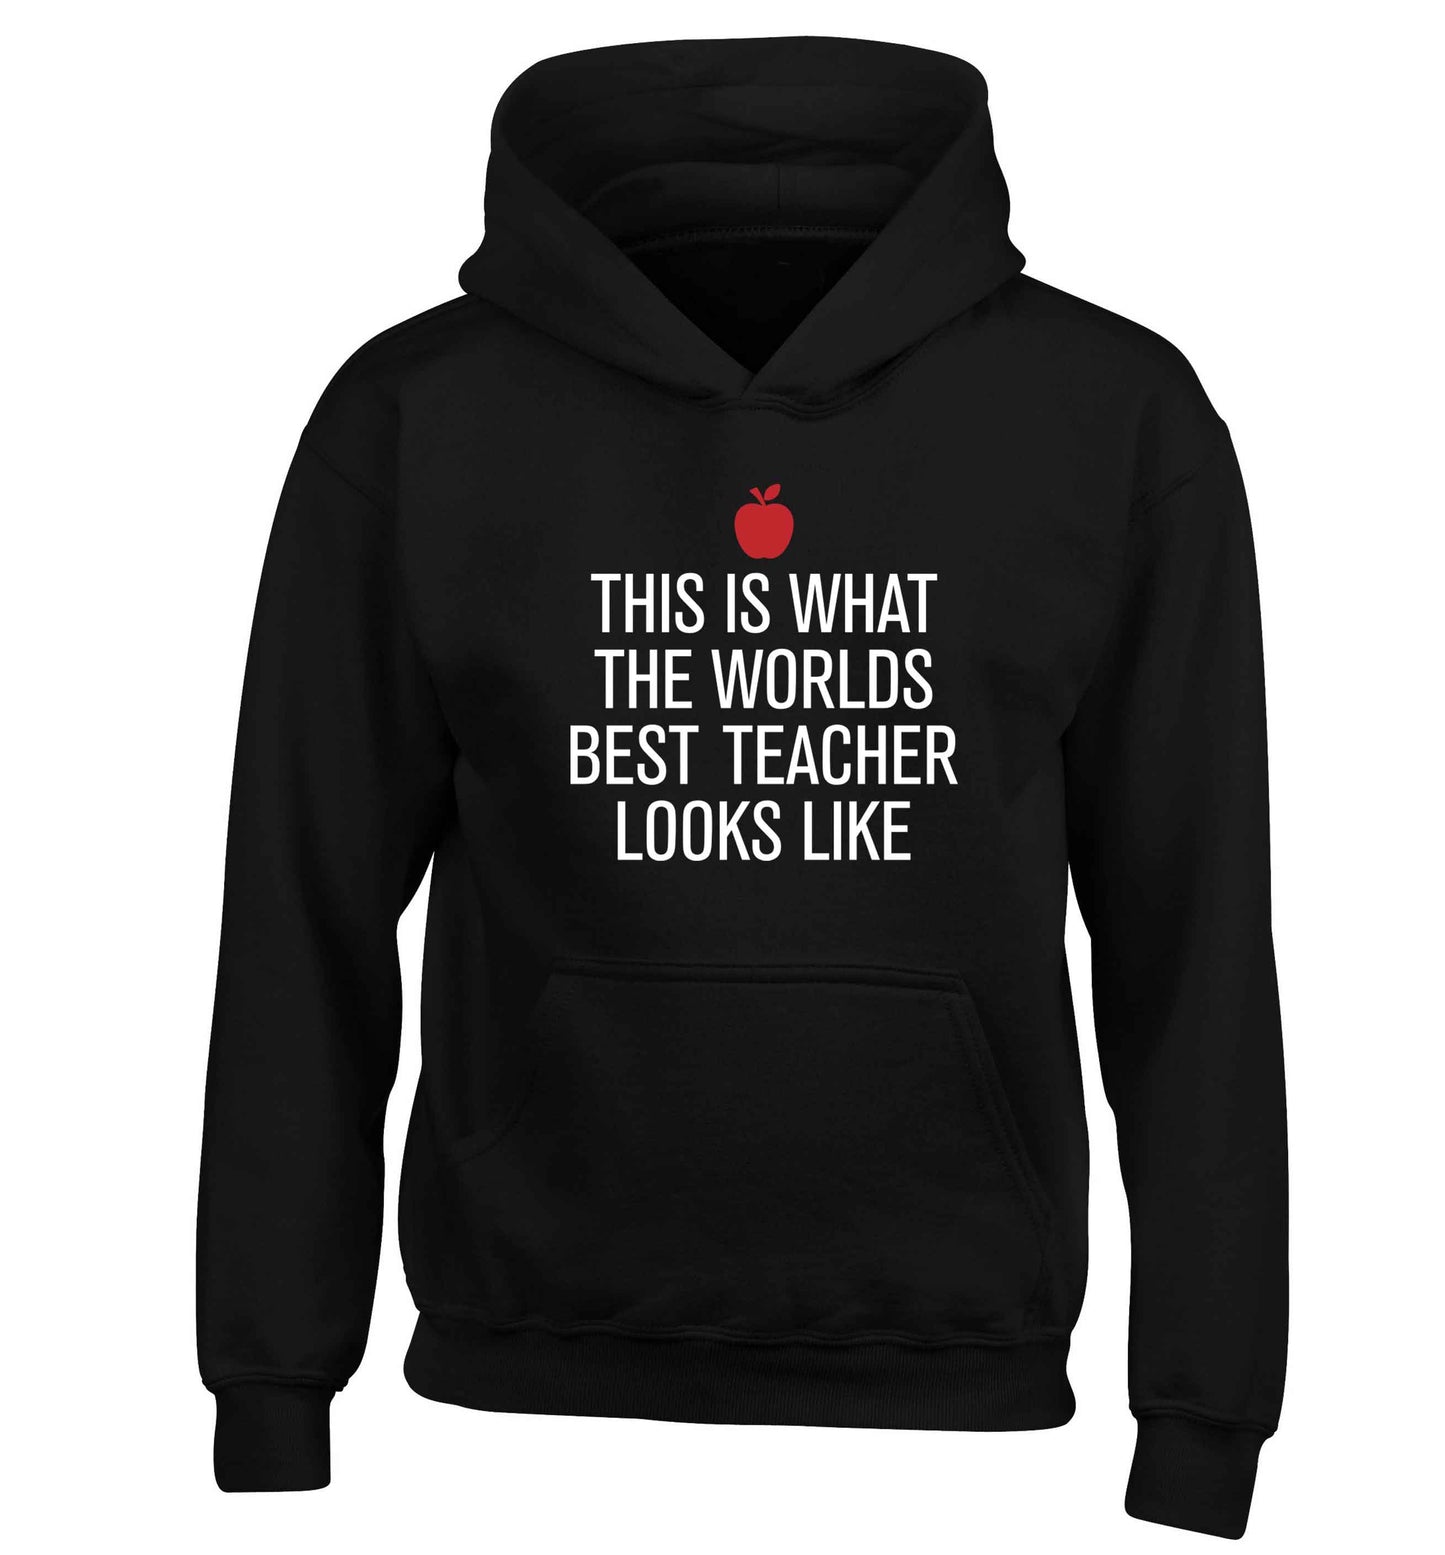 This is what the worlds best teacher looks like children's black hoodie 12-13 Years